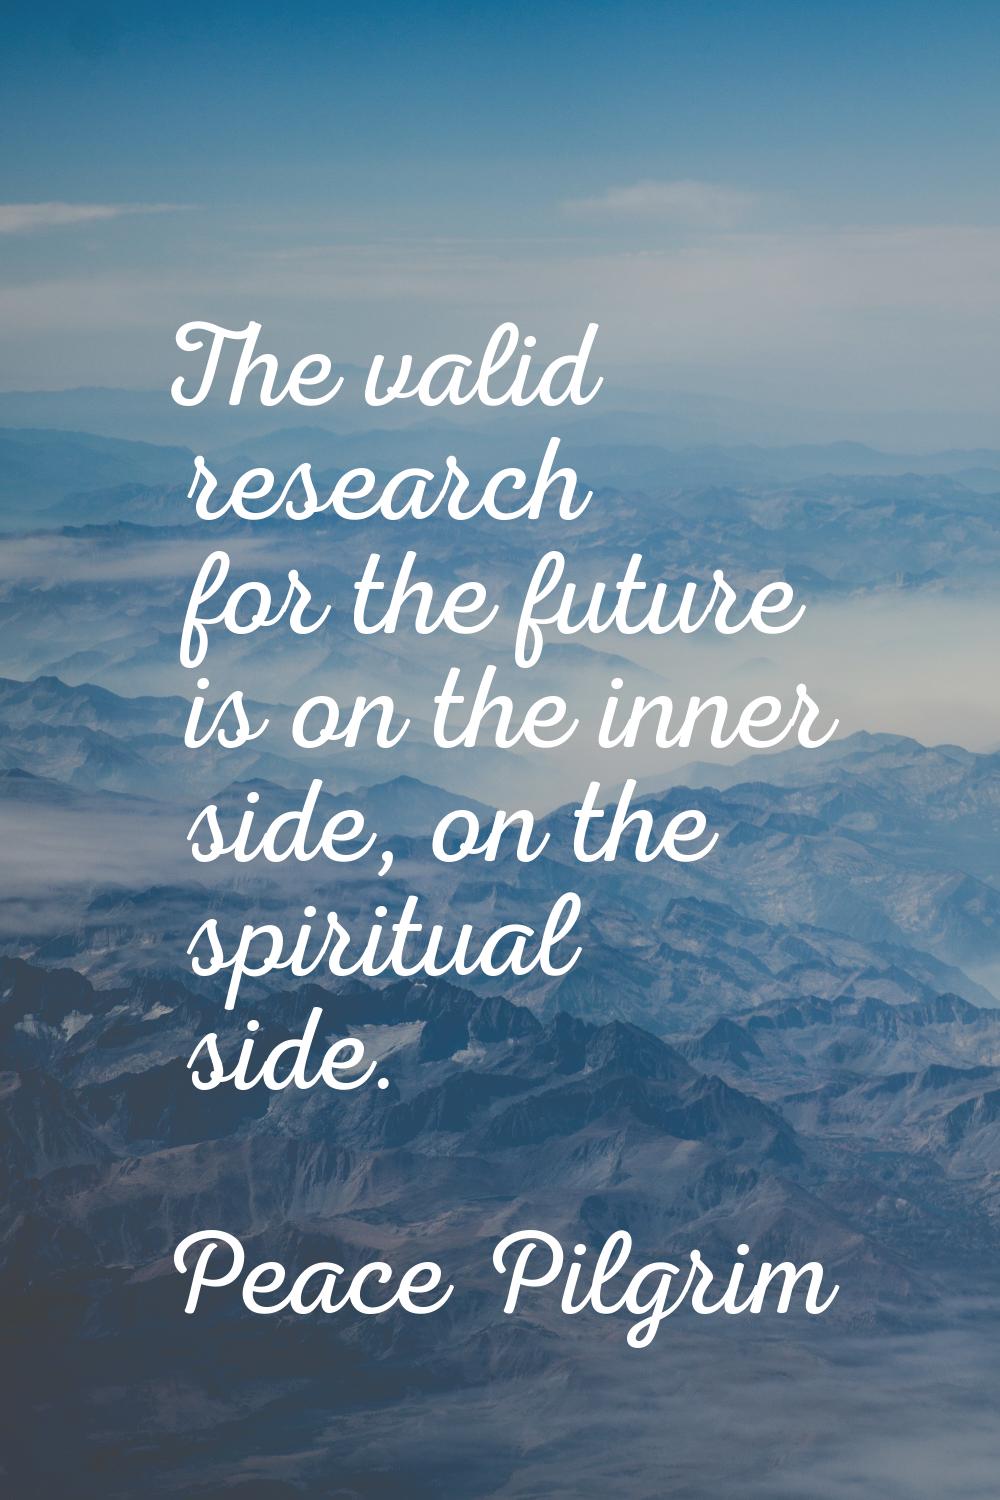 The valid research for the future is on the inner side, on the spiritual side.